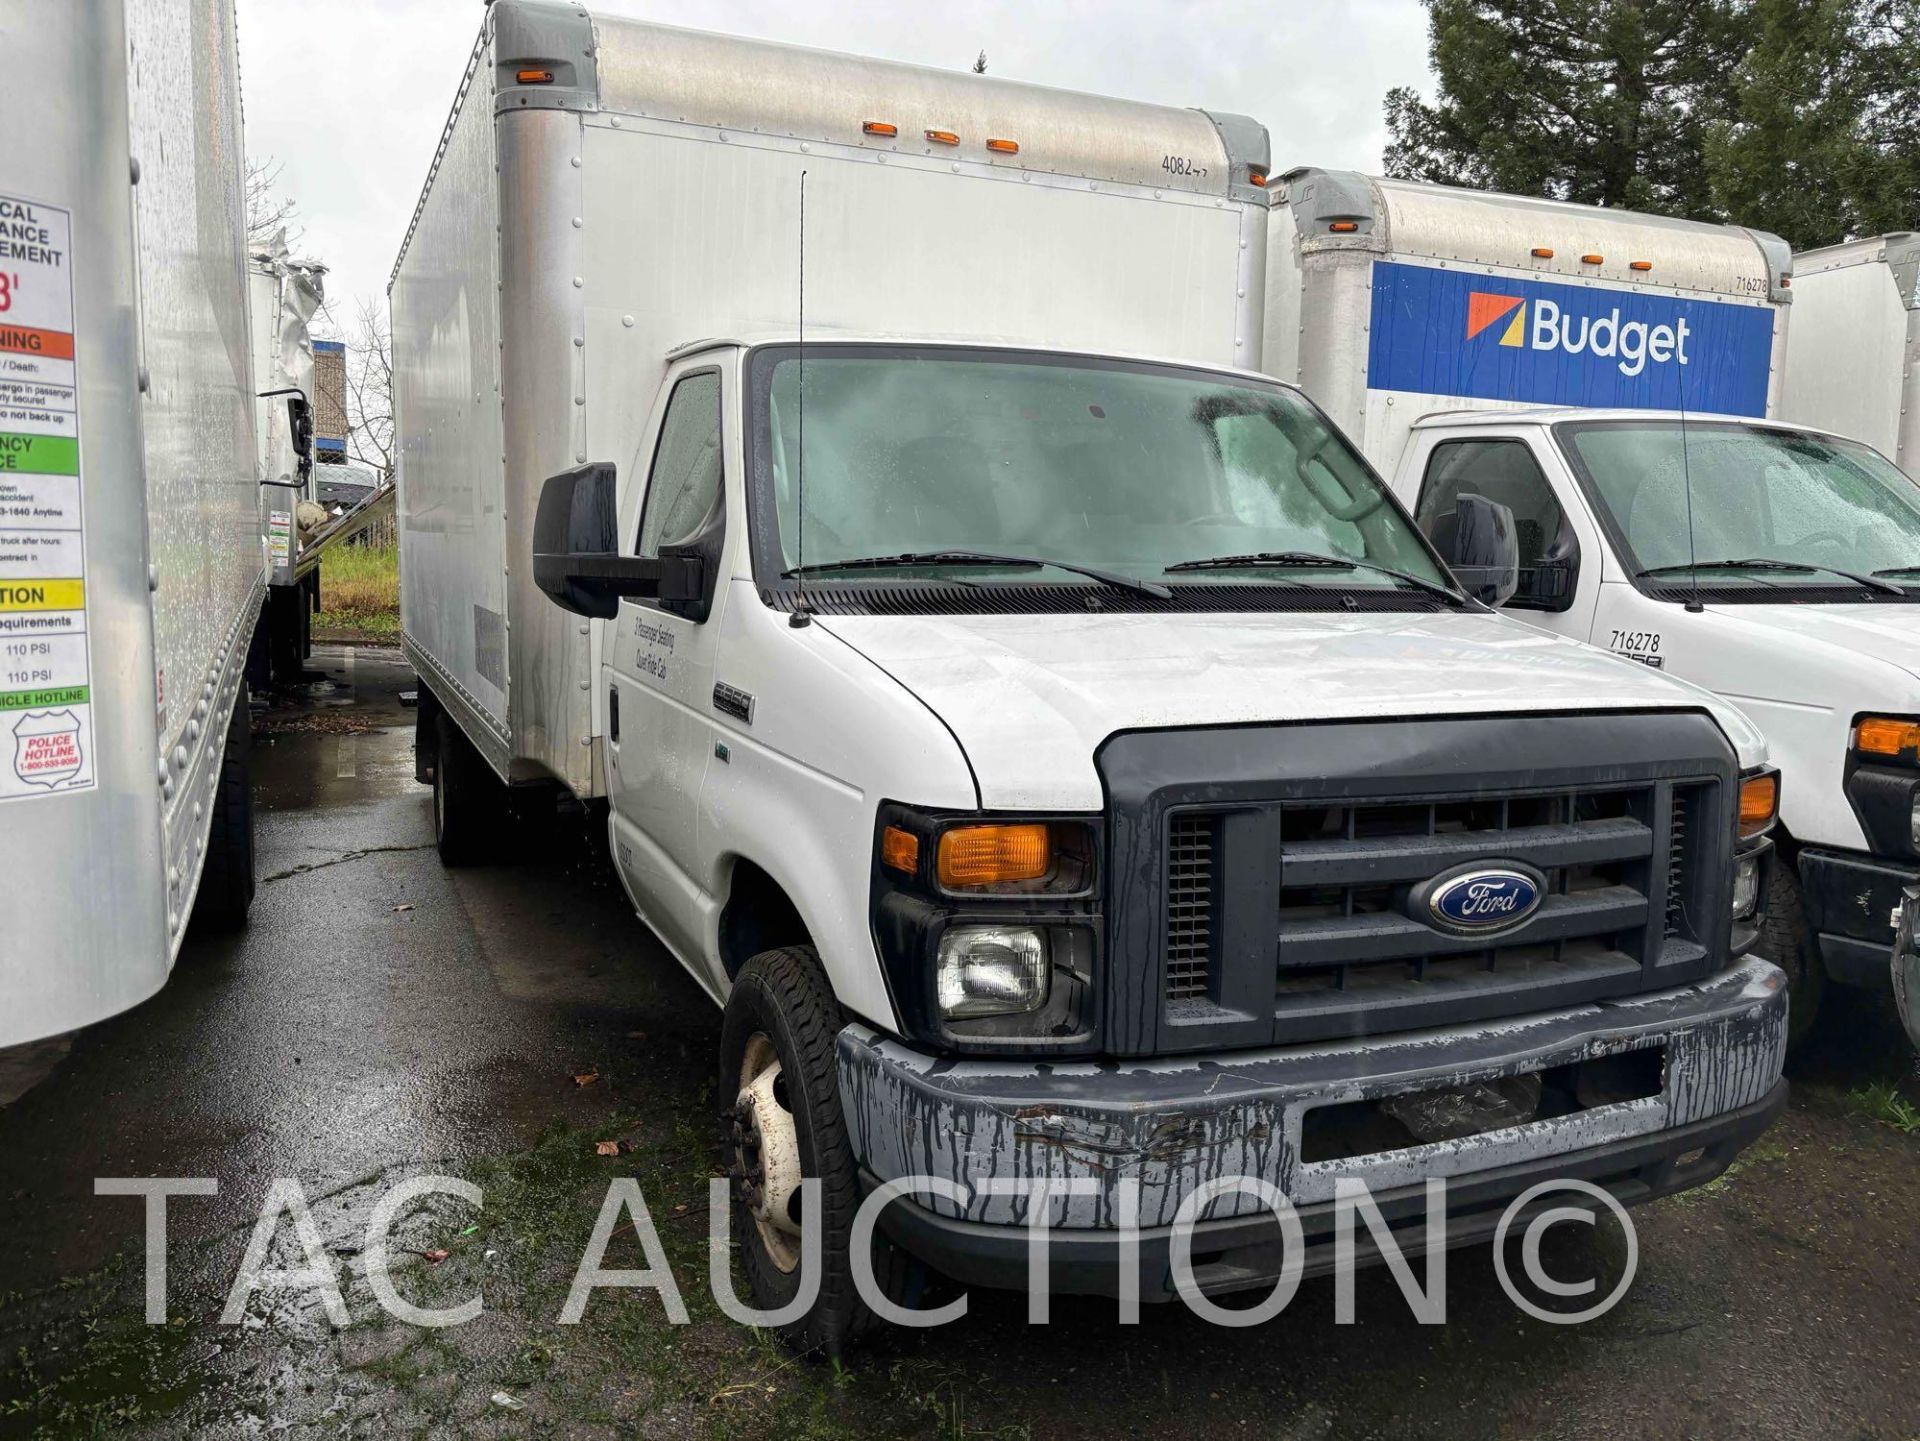 2014 Ford E-350 16ft Box Truck - Image 2 of 82